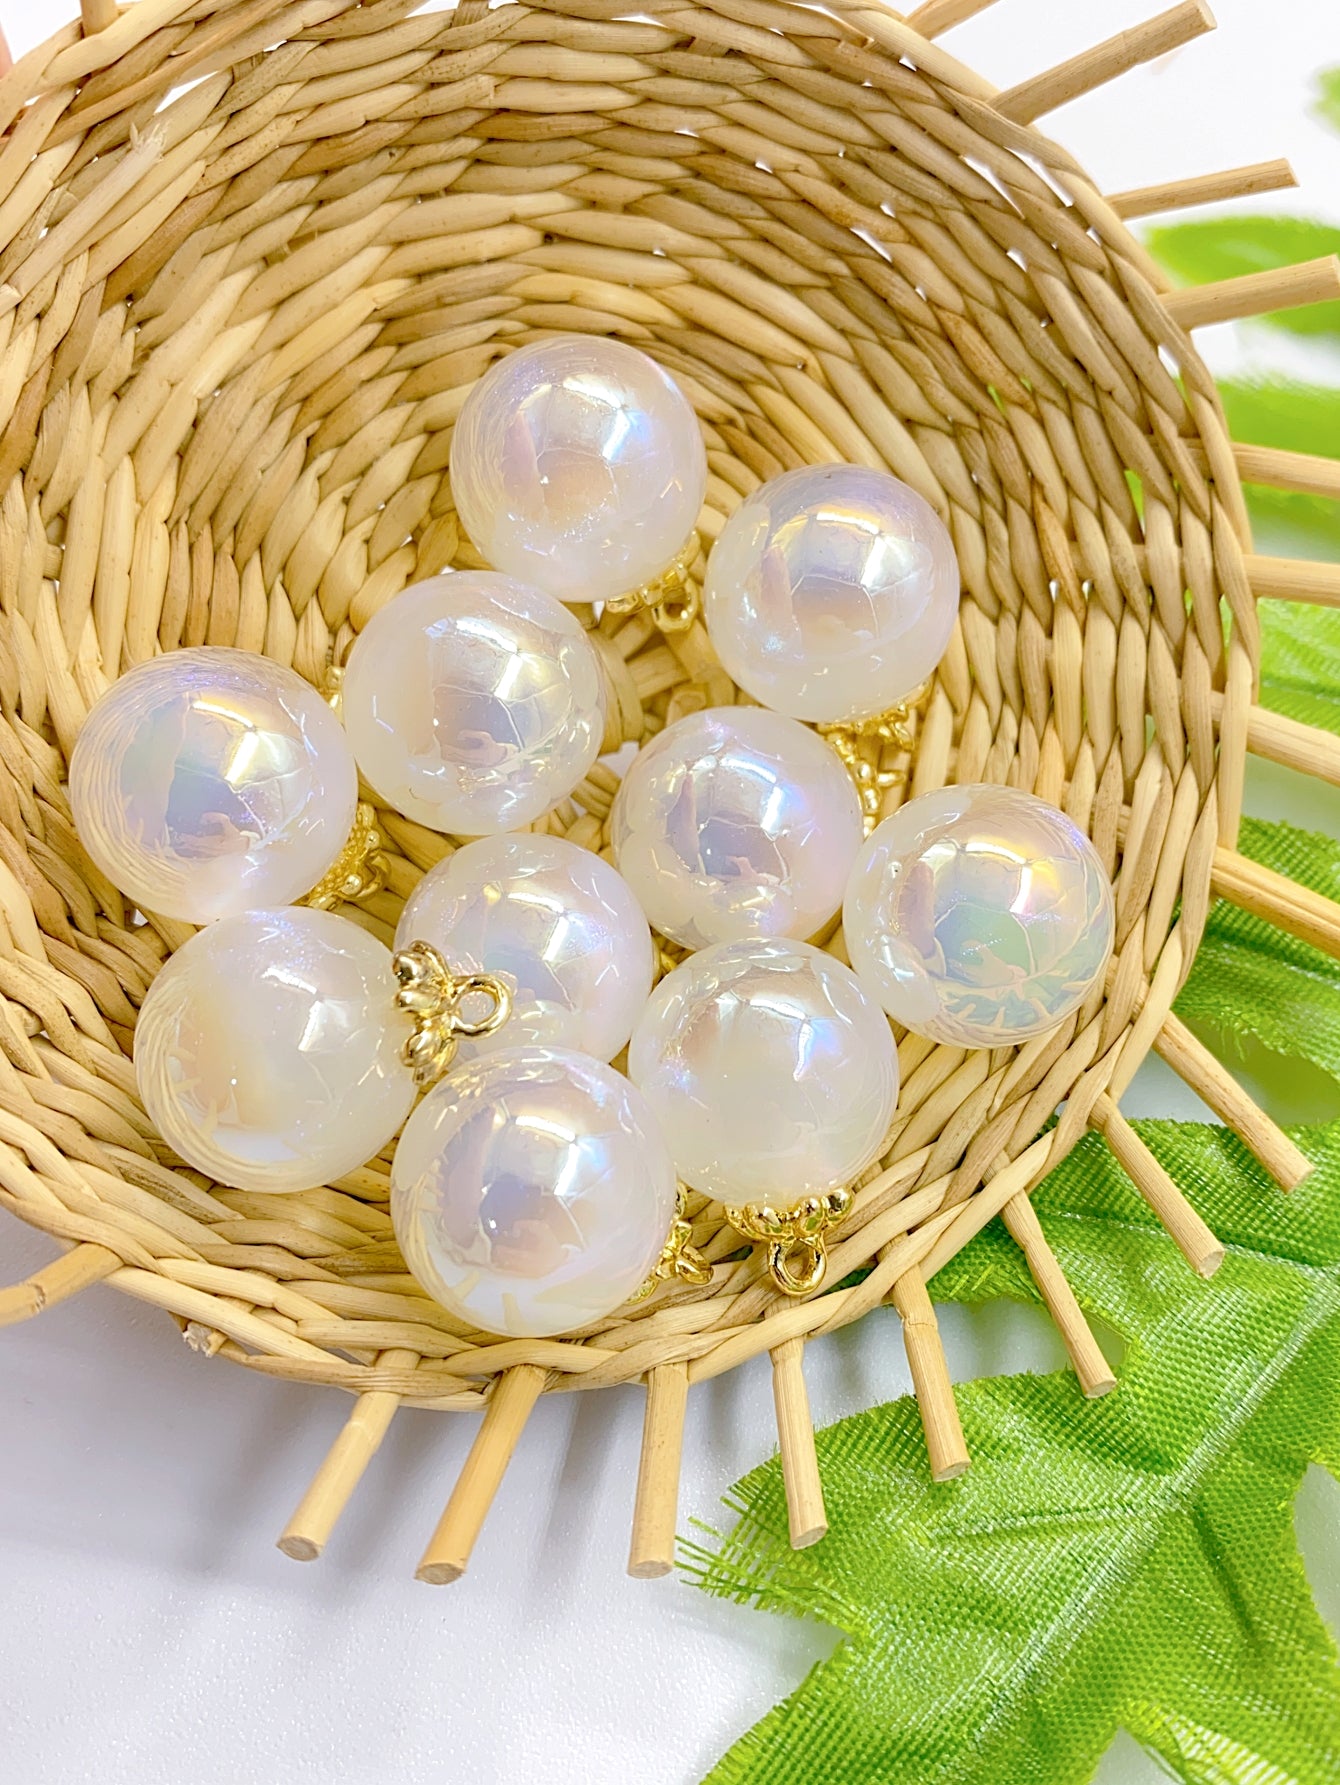 abs high-end mermaid star color series round bead jewelry clothing diy accessories material pearls 10